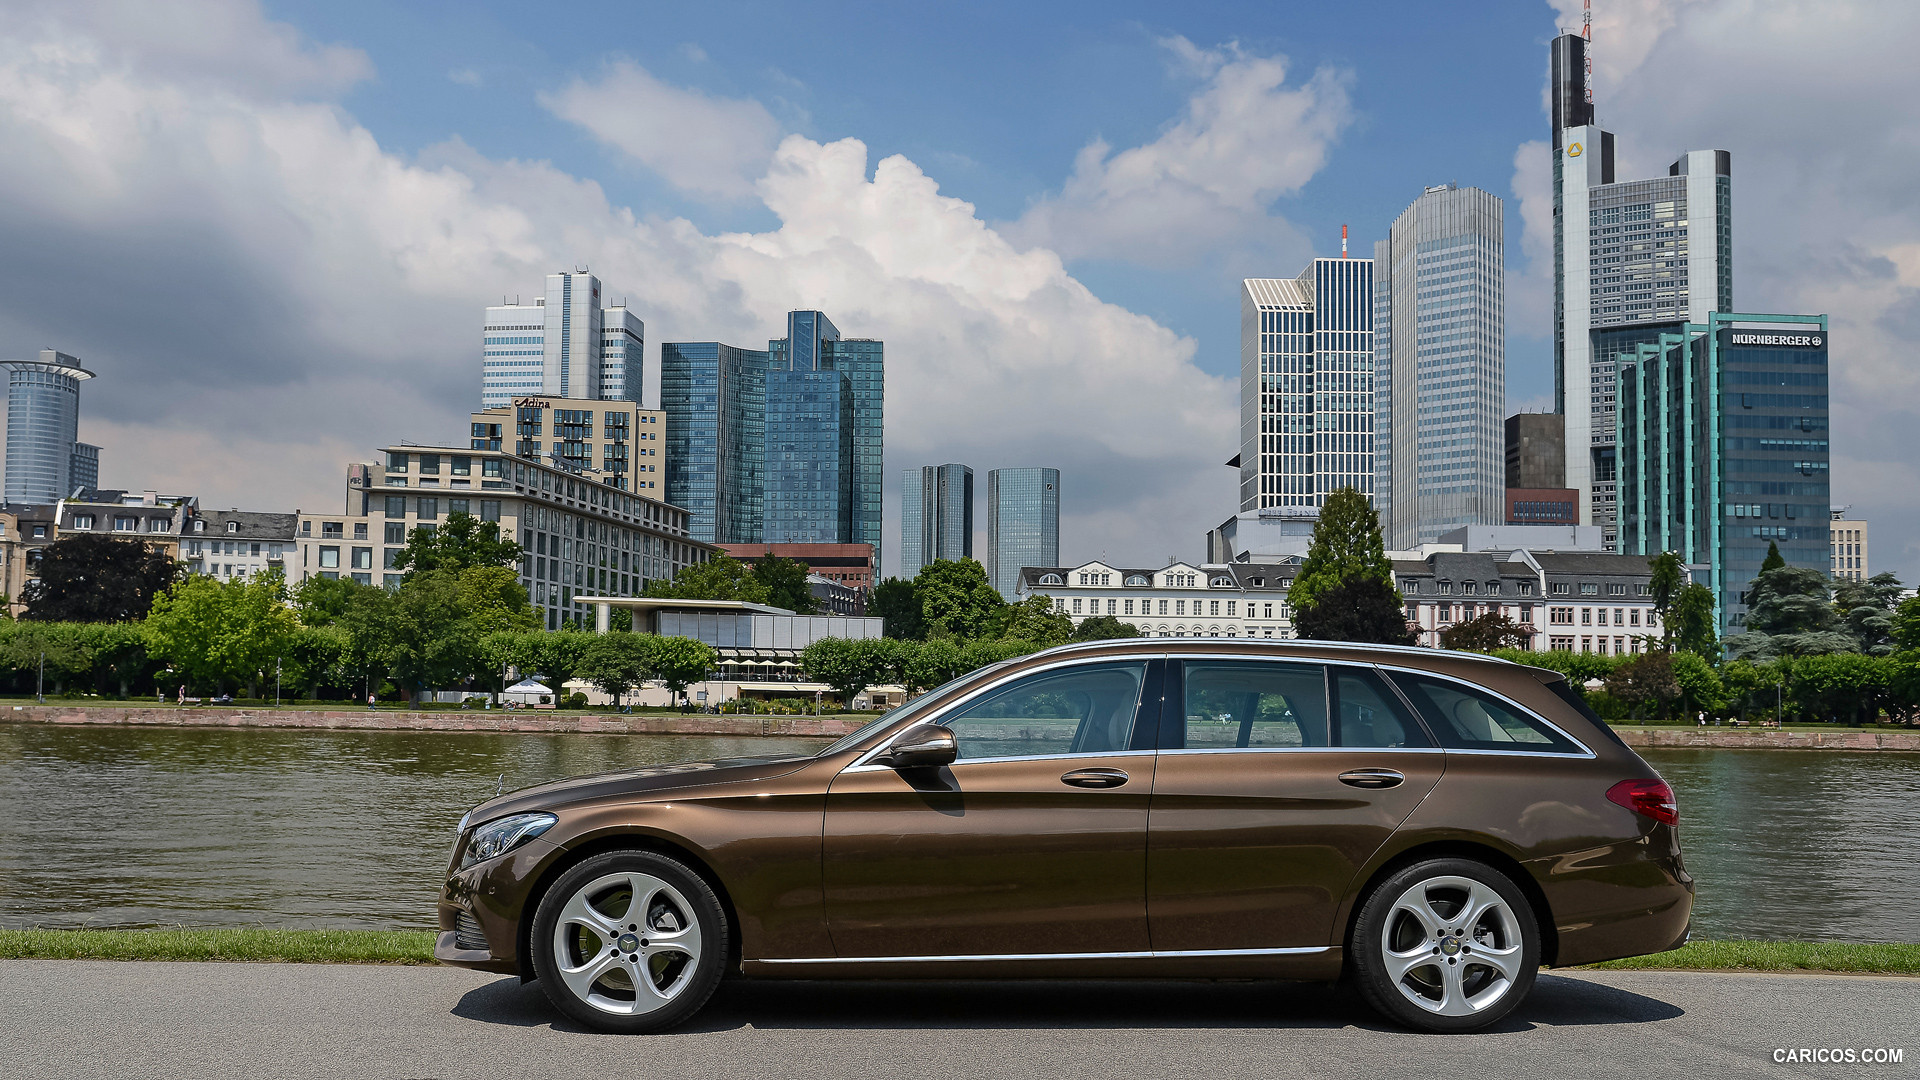 2015 Mercedes-Benz C-Class C 200 Estate (Exclusive, Citrin Brown) - Side, #147 of 173